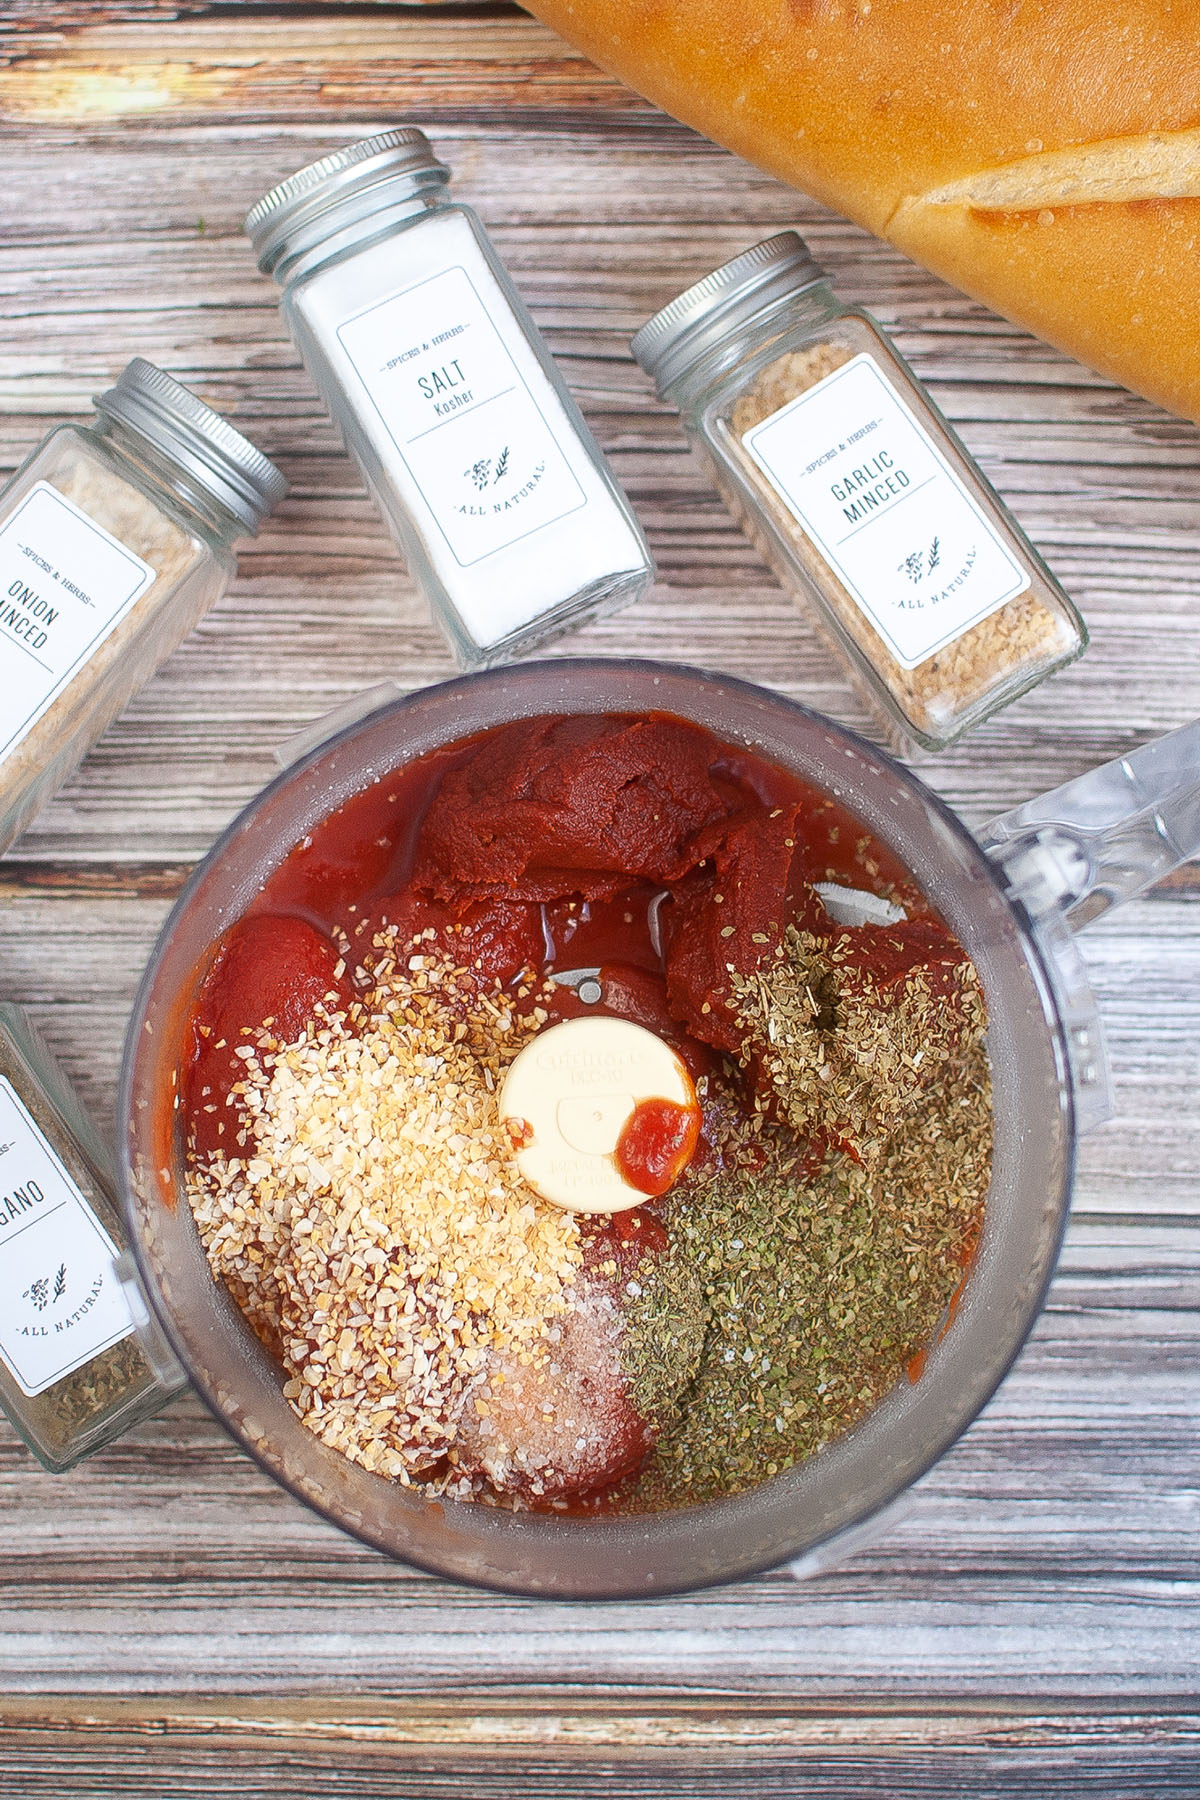 Tomato sauce and paste with the seasonings in a blender